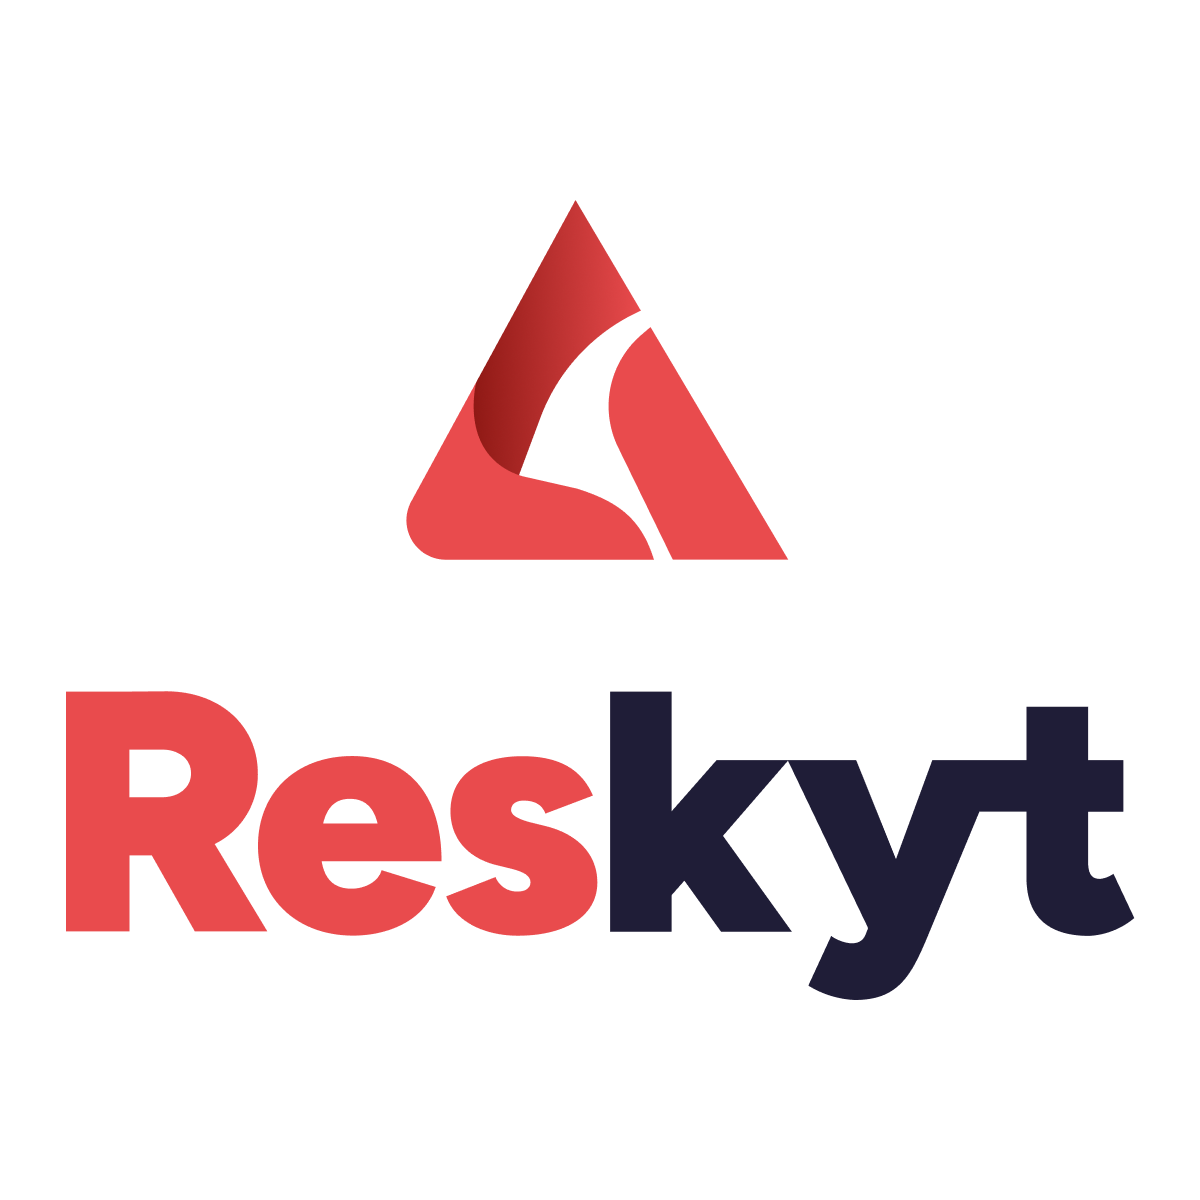 Hire Shopify Experts to integrate Reskyt ‑ Aplicación Móvil  app into a Shopify store